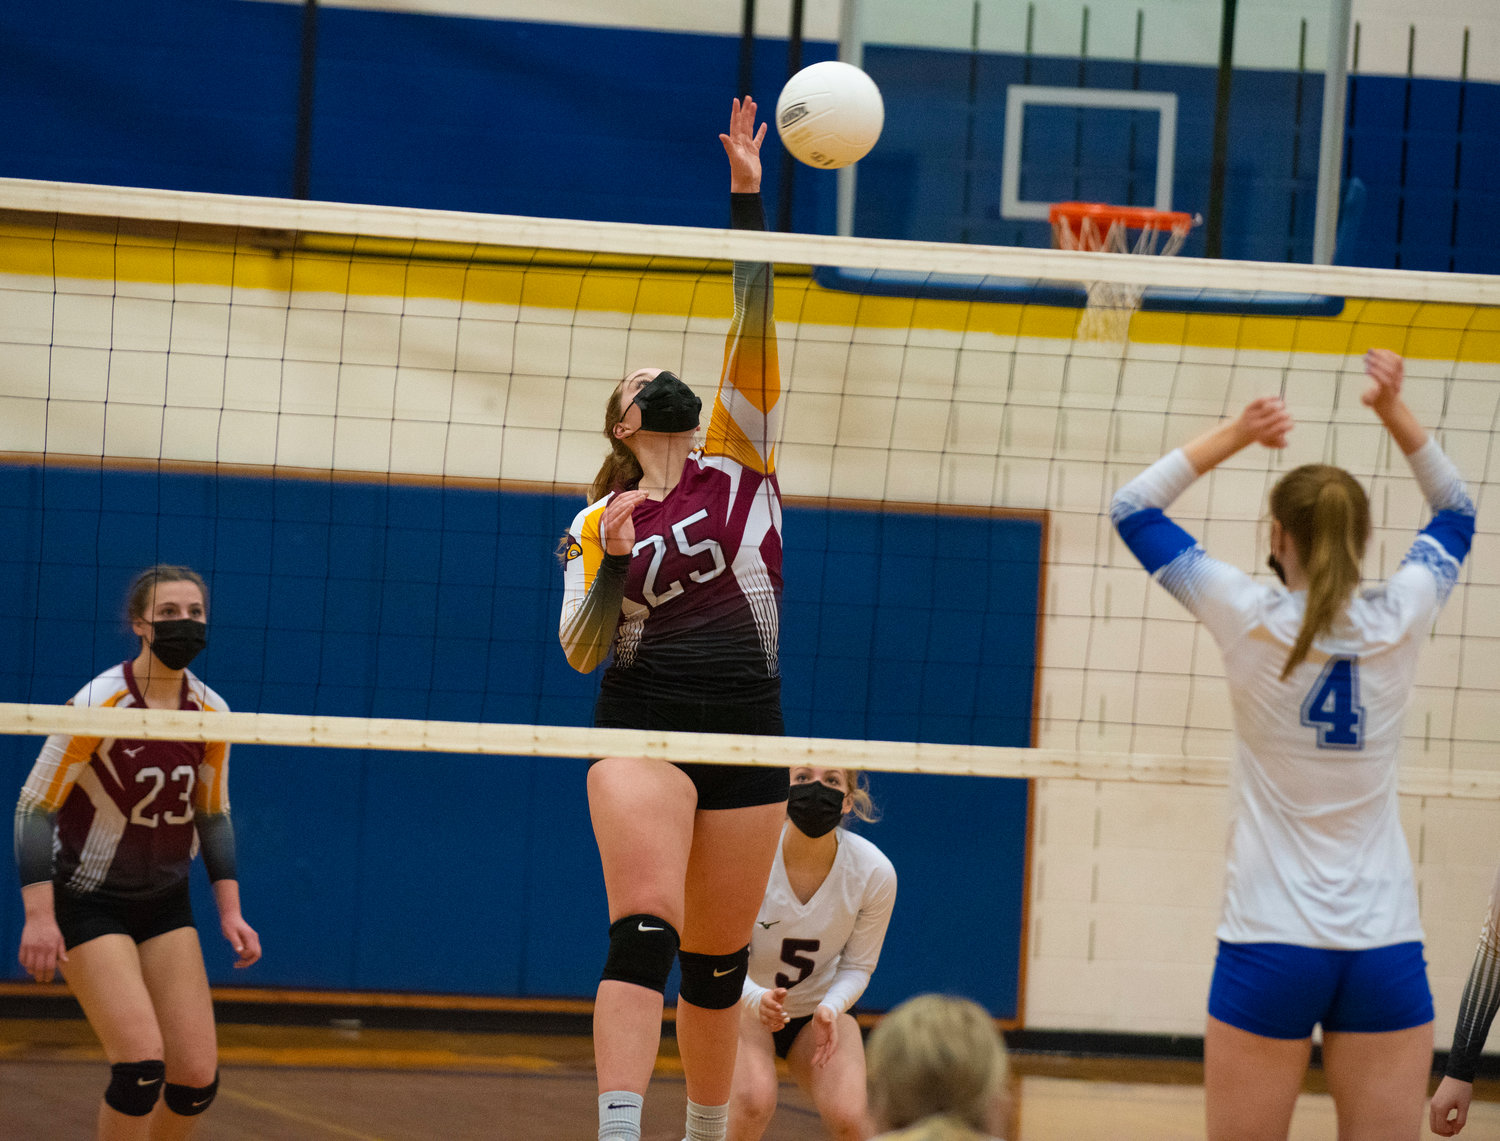 Winlock's Addison Hall spikes the ball against Toutle Lake.